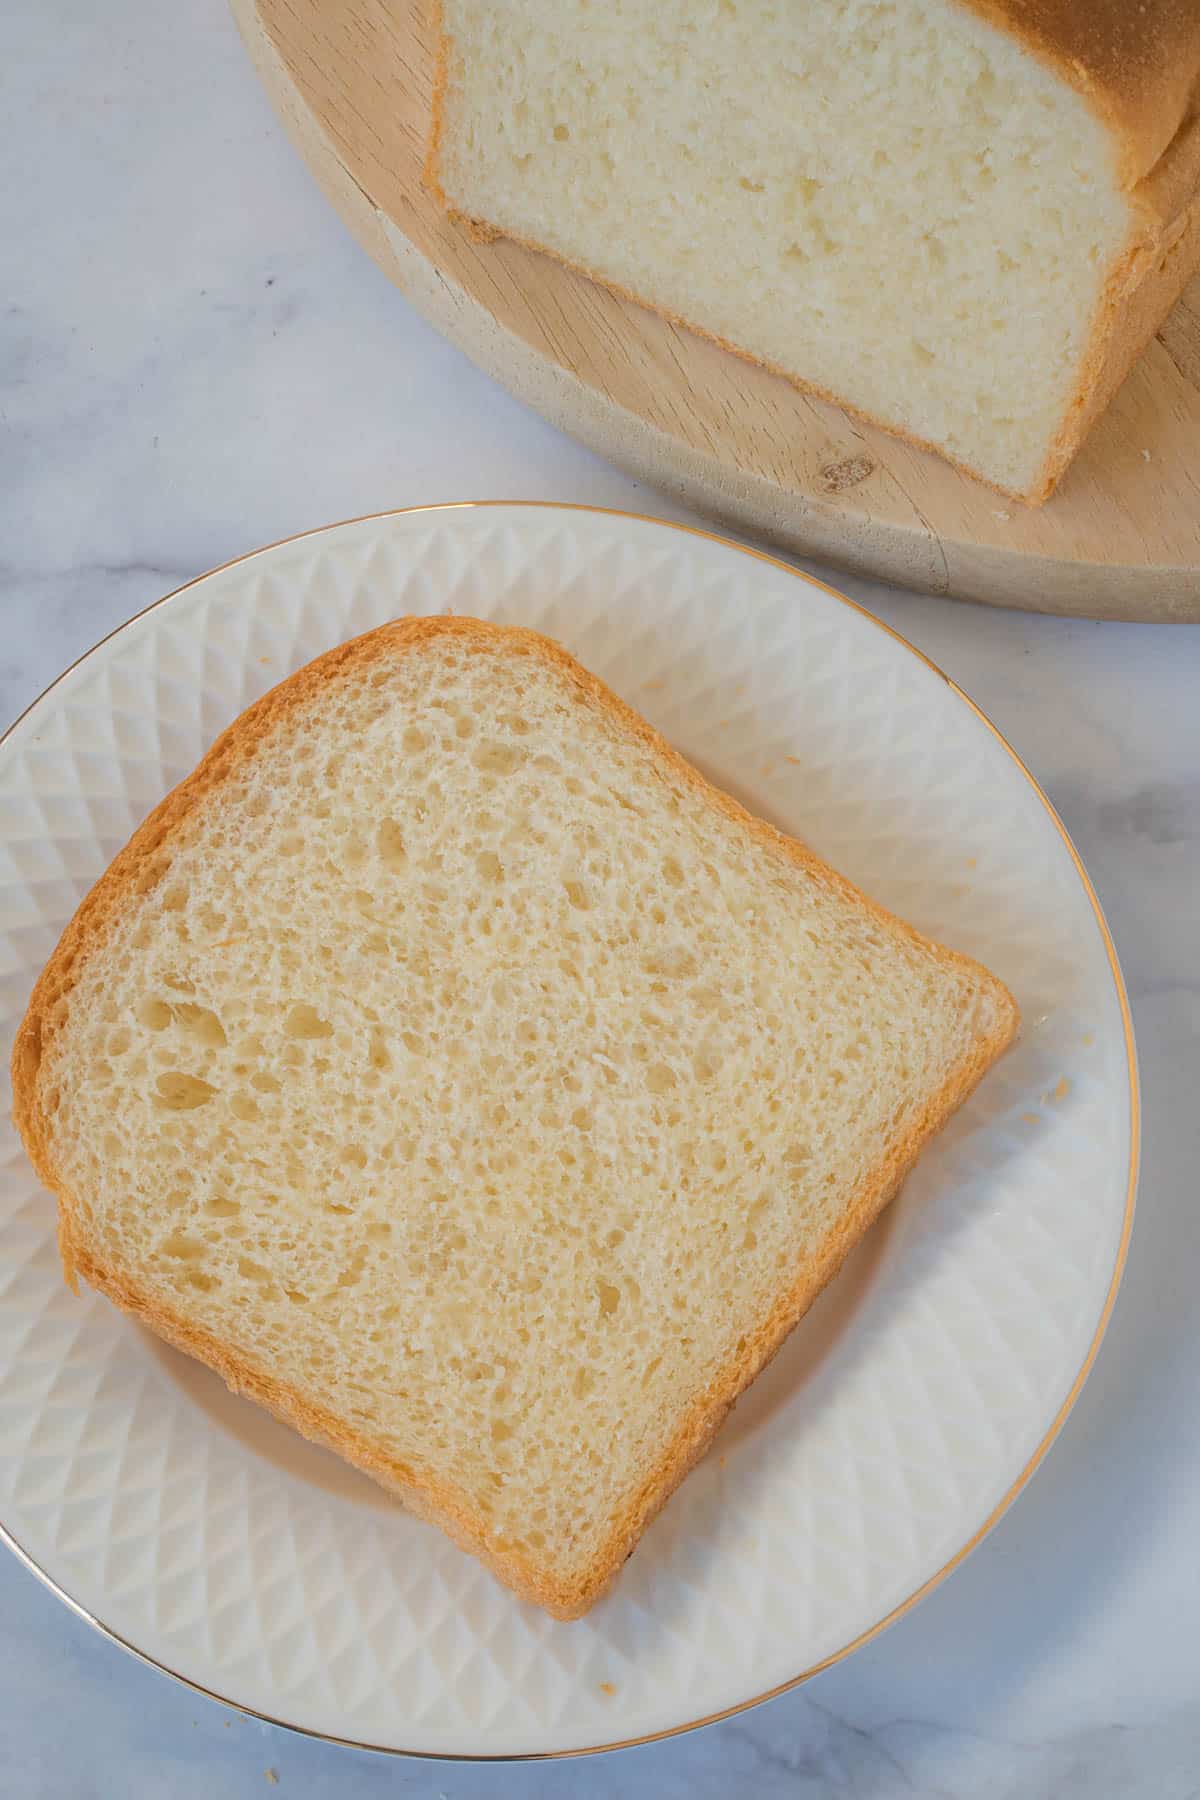 A slice of plain white bread on a white plate.